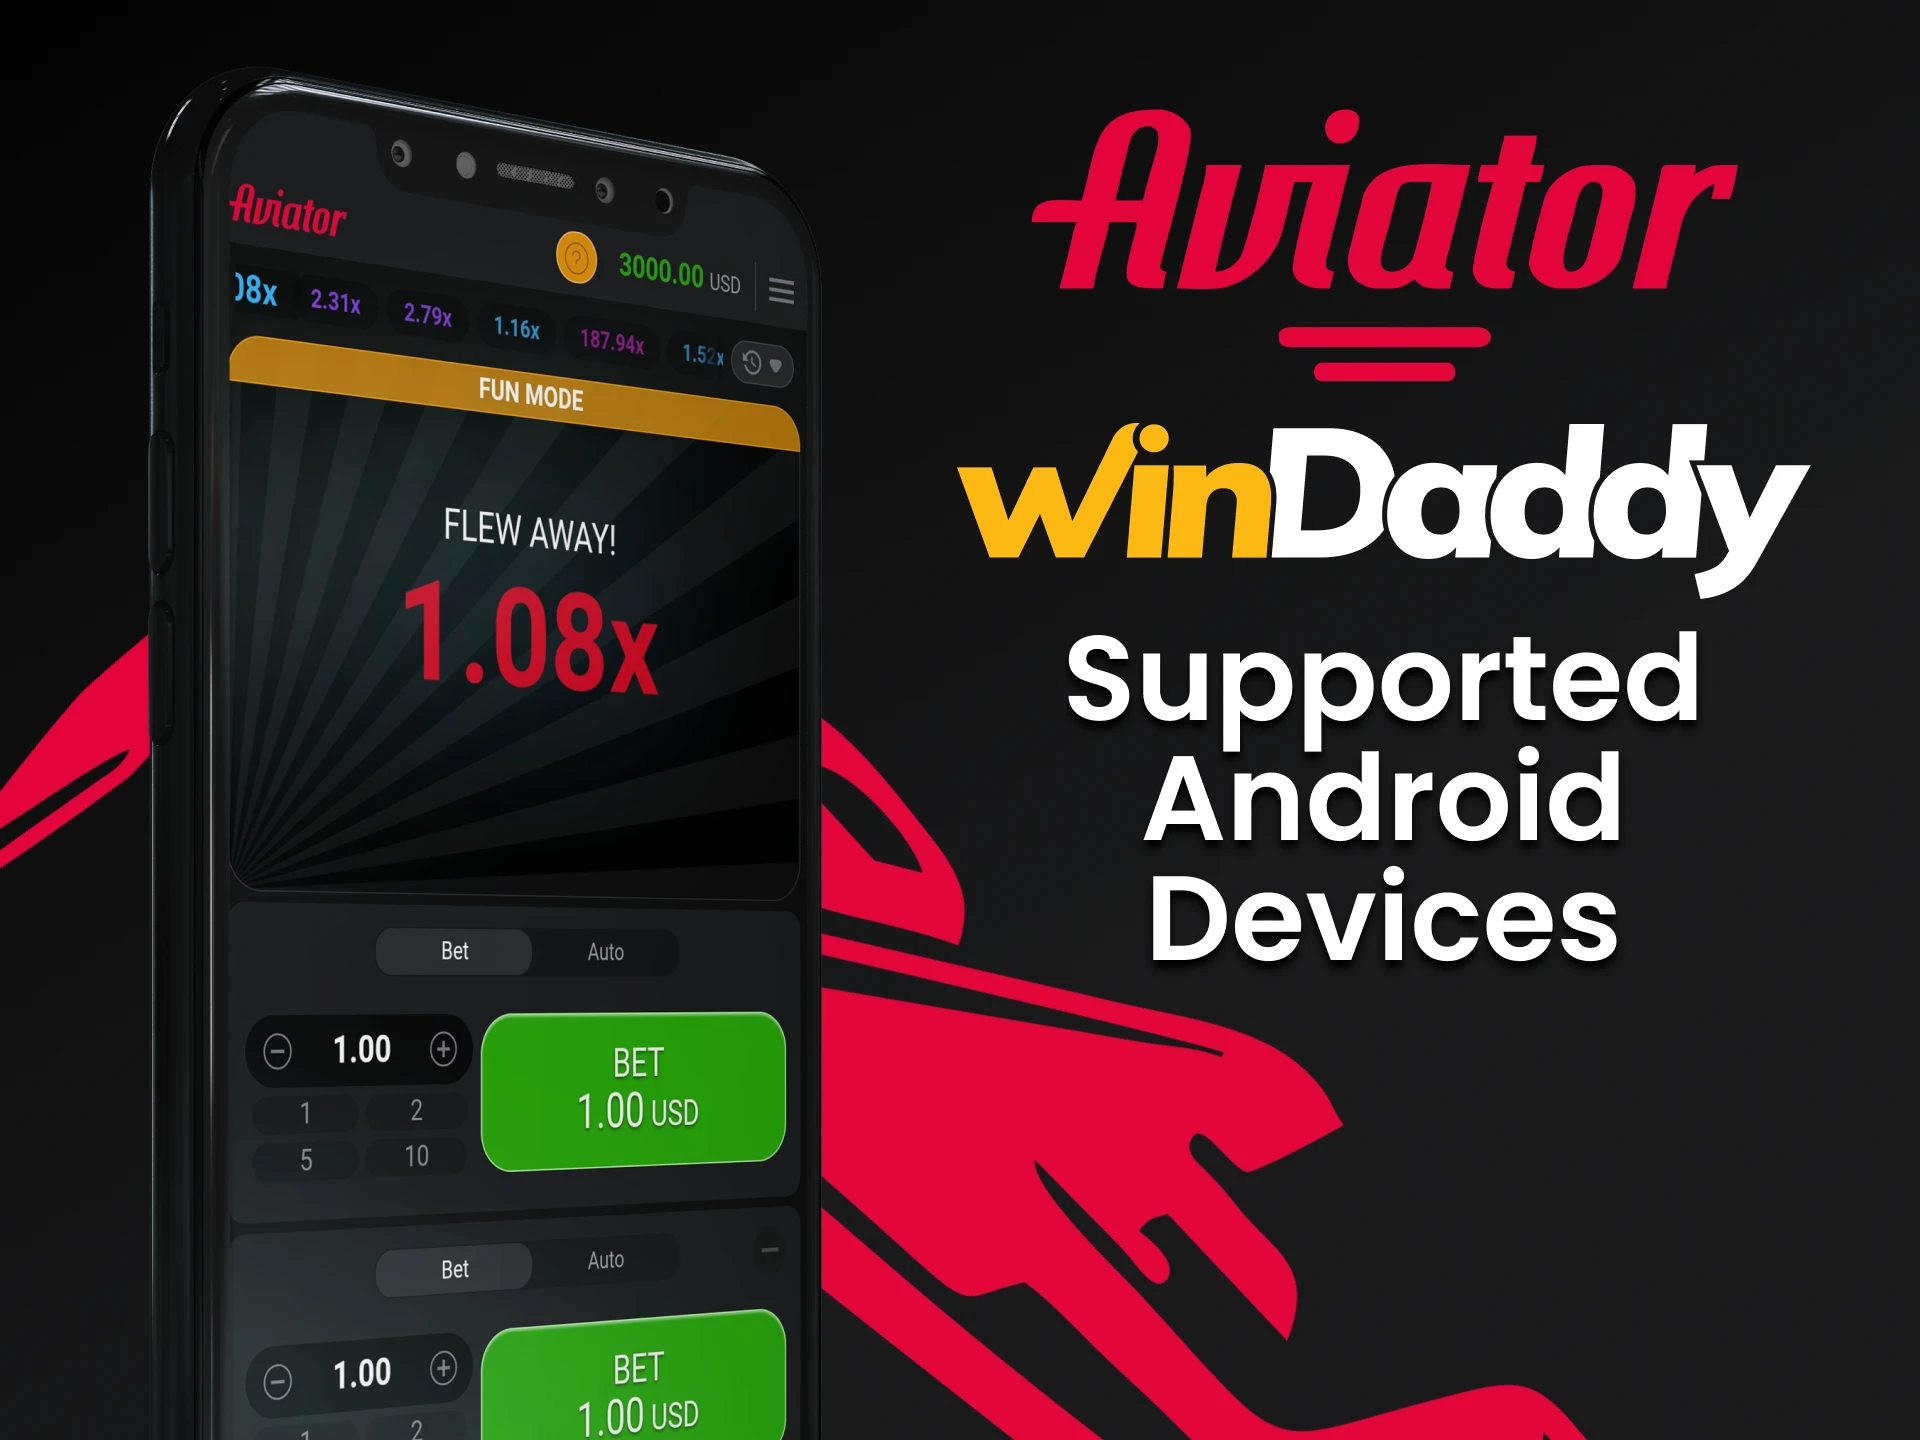 To play Aviator by WinDaddy use Android device.